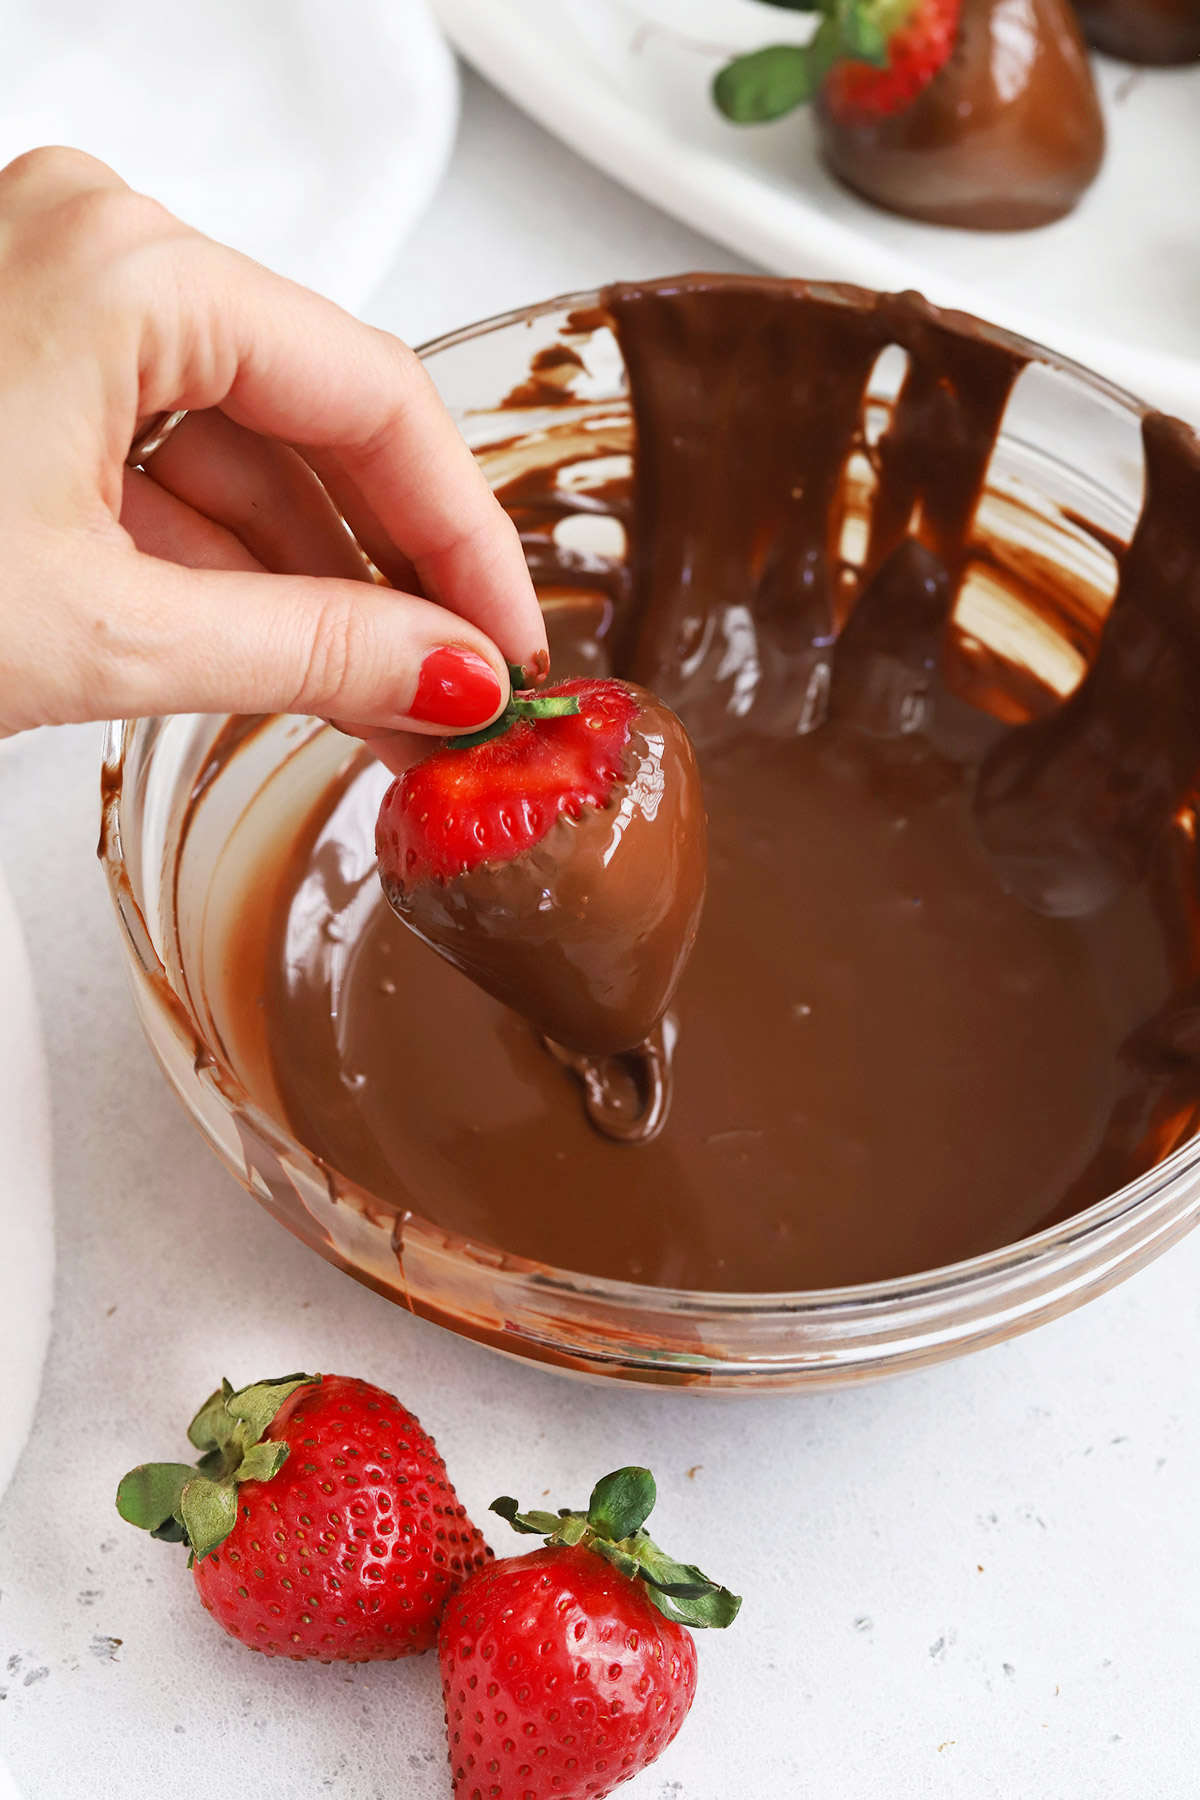 Front view of a hand dipping a strawberry into a bowl of dairy-free chocolate